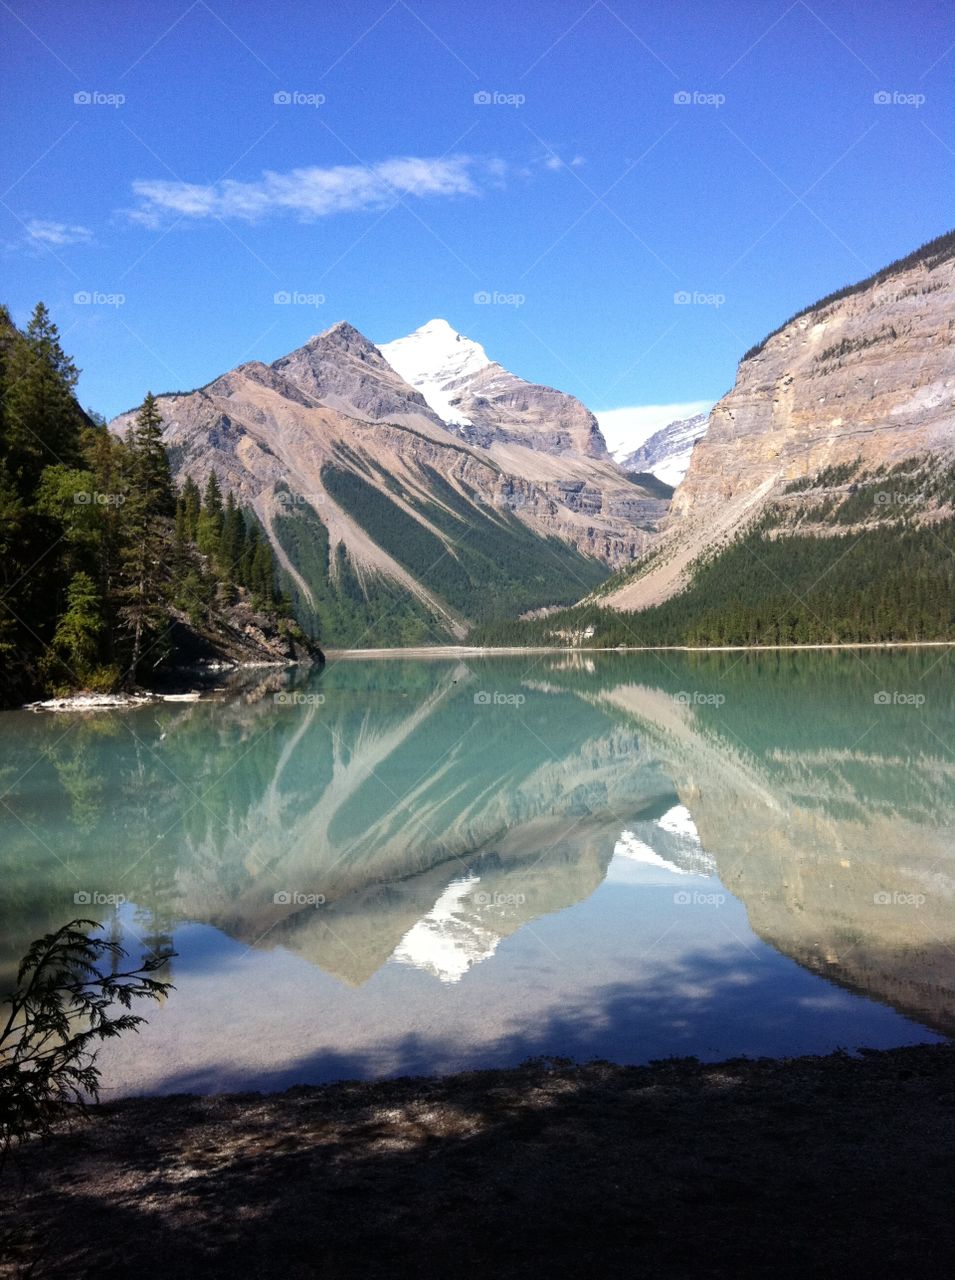 Berg Lake in Mount Robson Provincial Park has one of the most picturesque lakes in the British Columbia Rocky Mountains.  This lake is an hour hike from the parking lot and is worth the trek through the forest on this well maintained hiking trail.